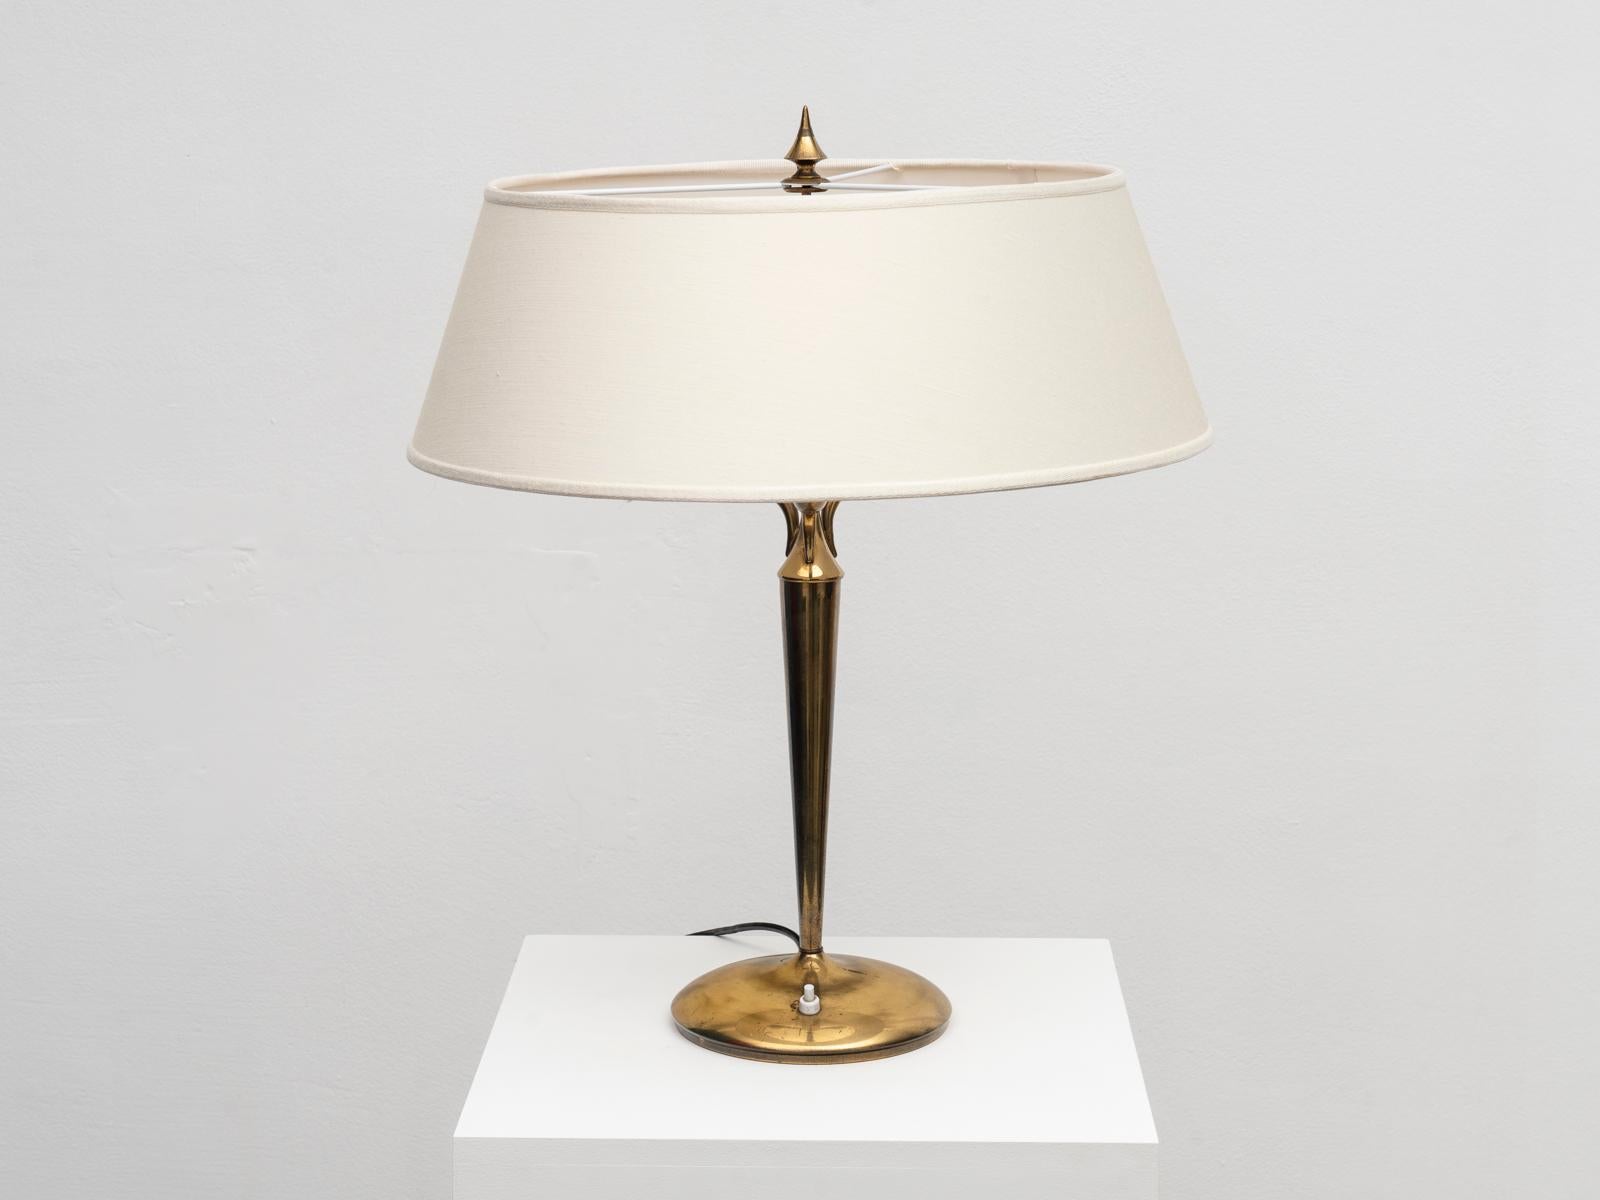 This table lamp was designed in the 1940s by the Italian architect Emilio Lancia, a peer of Gio Ponti with whom he worked on several projects.
This tall three-armed table lamp was manufactured in solid brass. The fabric lampshade is newly made. The